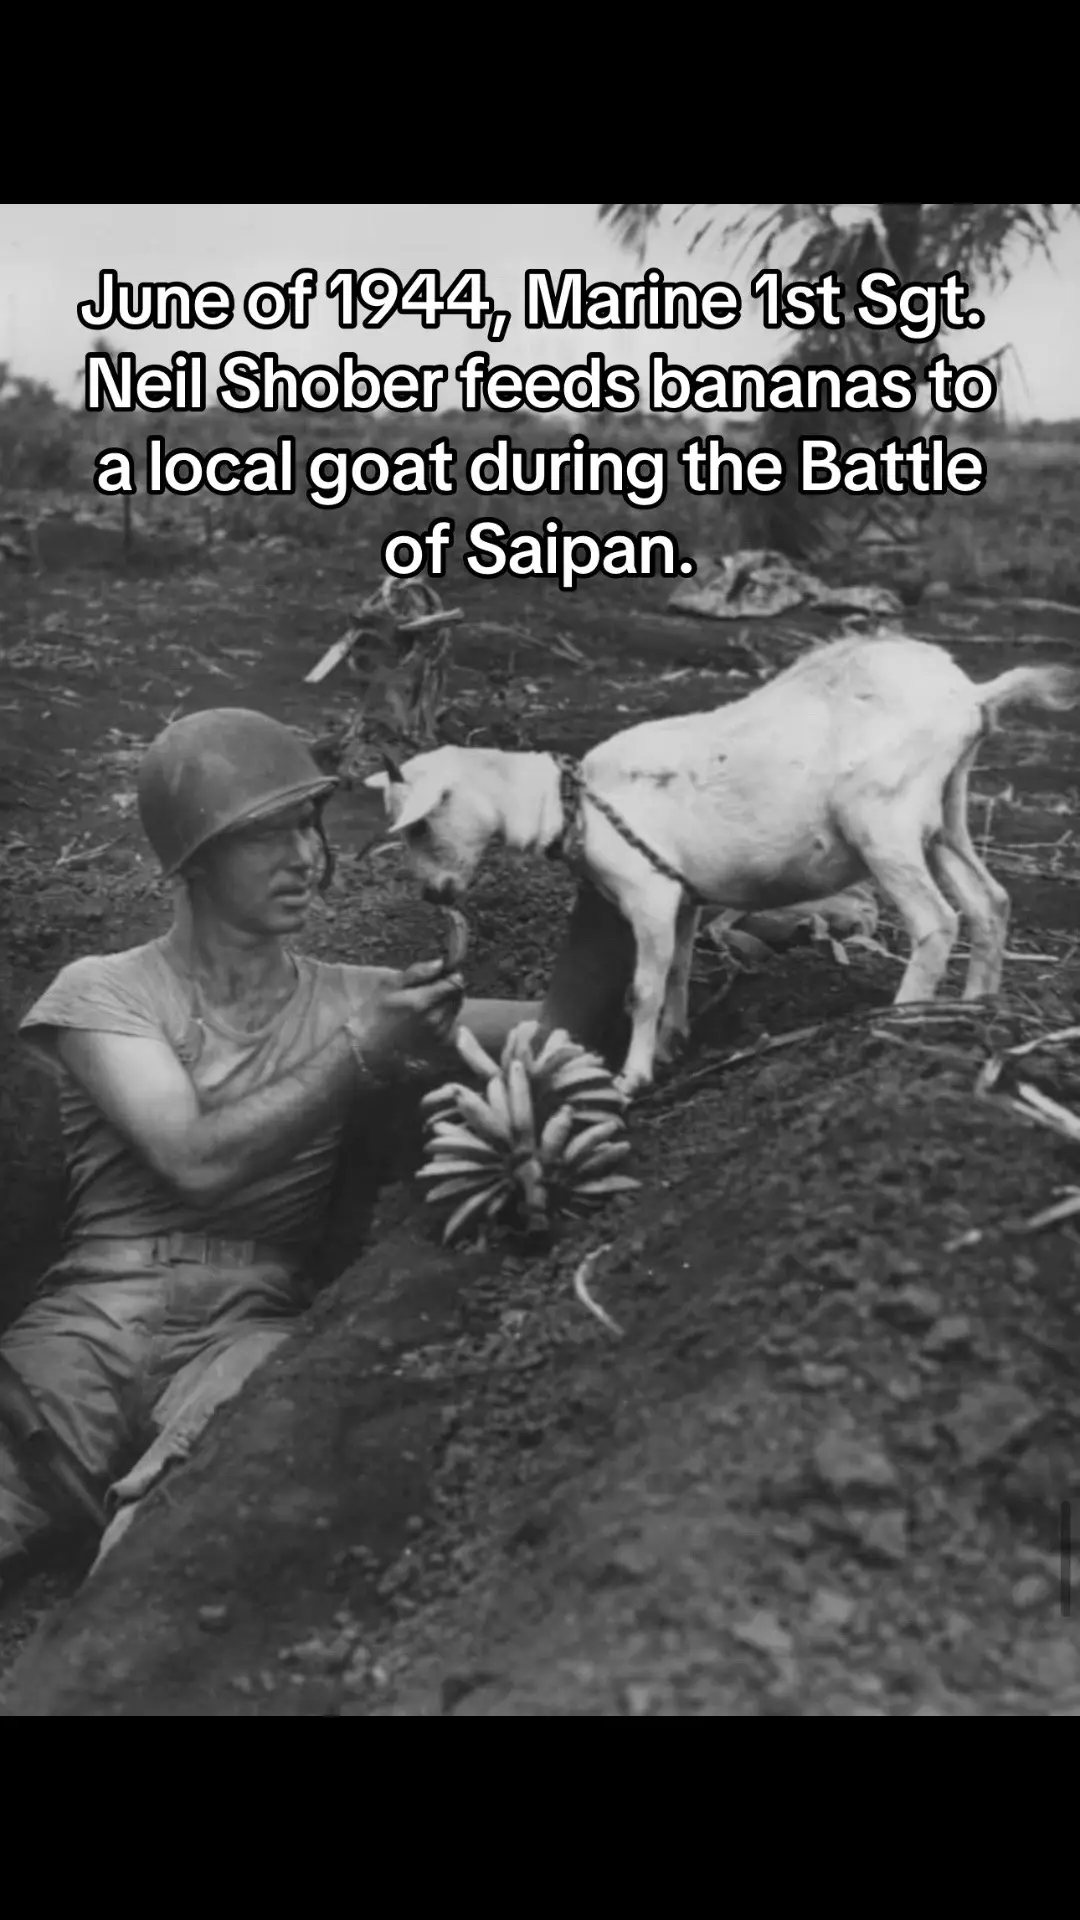 June of 1944, Marine 1st Sgt. Neil Shober feeds bananas to a local goat during the Battle of Saipan. . . . . . #fyp #fypシ #foryou #foryoupage #miltok #military #army #navy #airforce #marinecorps #usmarines #marine #coastguard #spaceforce #soldier #kagandunlap 